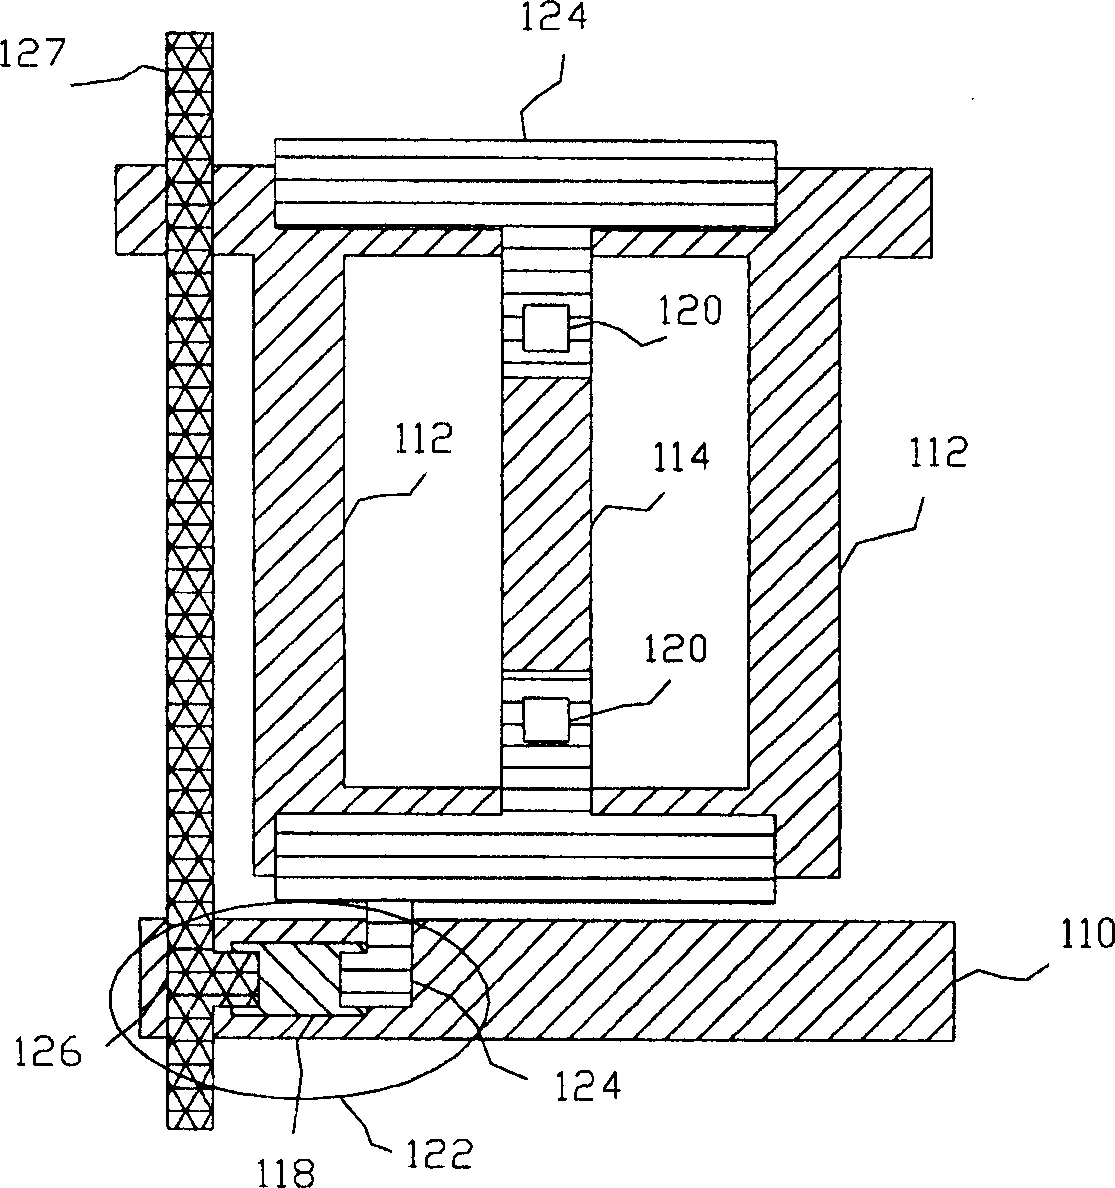 Transverse electric field liquid crystal display device picture element, and its substrate and picture element process